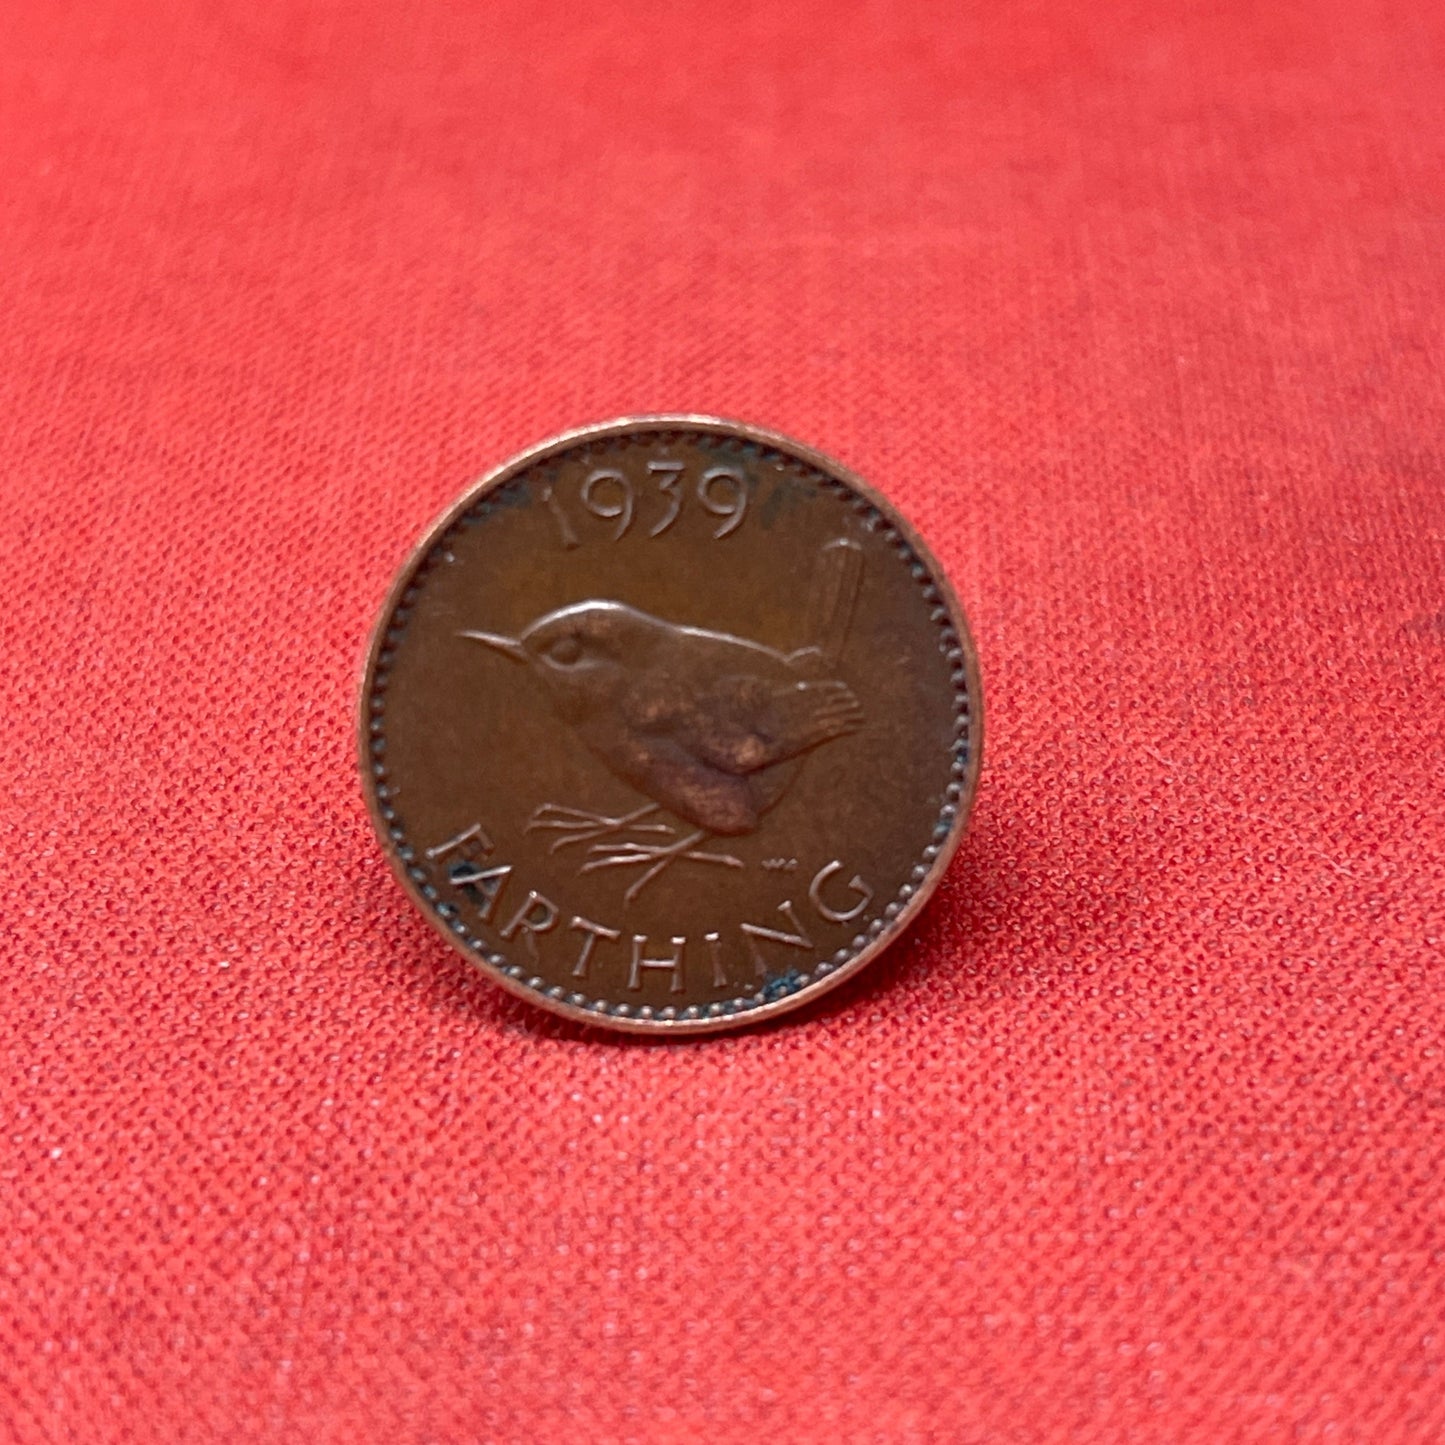 Discover the King George VI Farthing 1940, a historic British coin featuring the iconic wren design. Perfect for collectors and history enthusiasts, this bronze coin reflects the resilience of wartime Britain.